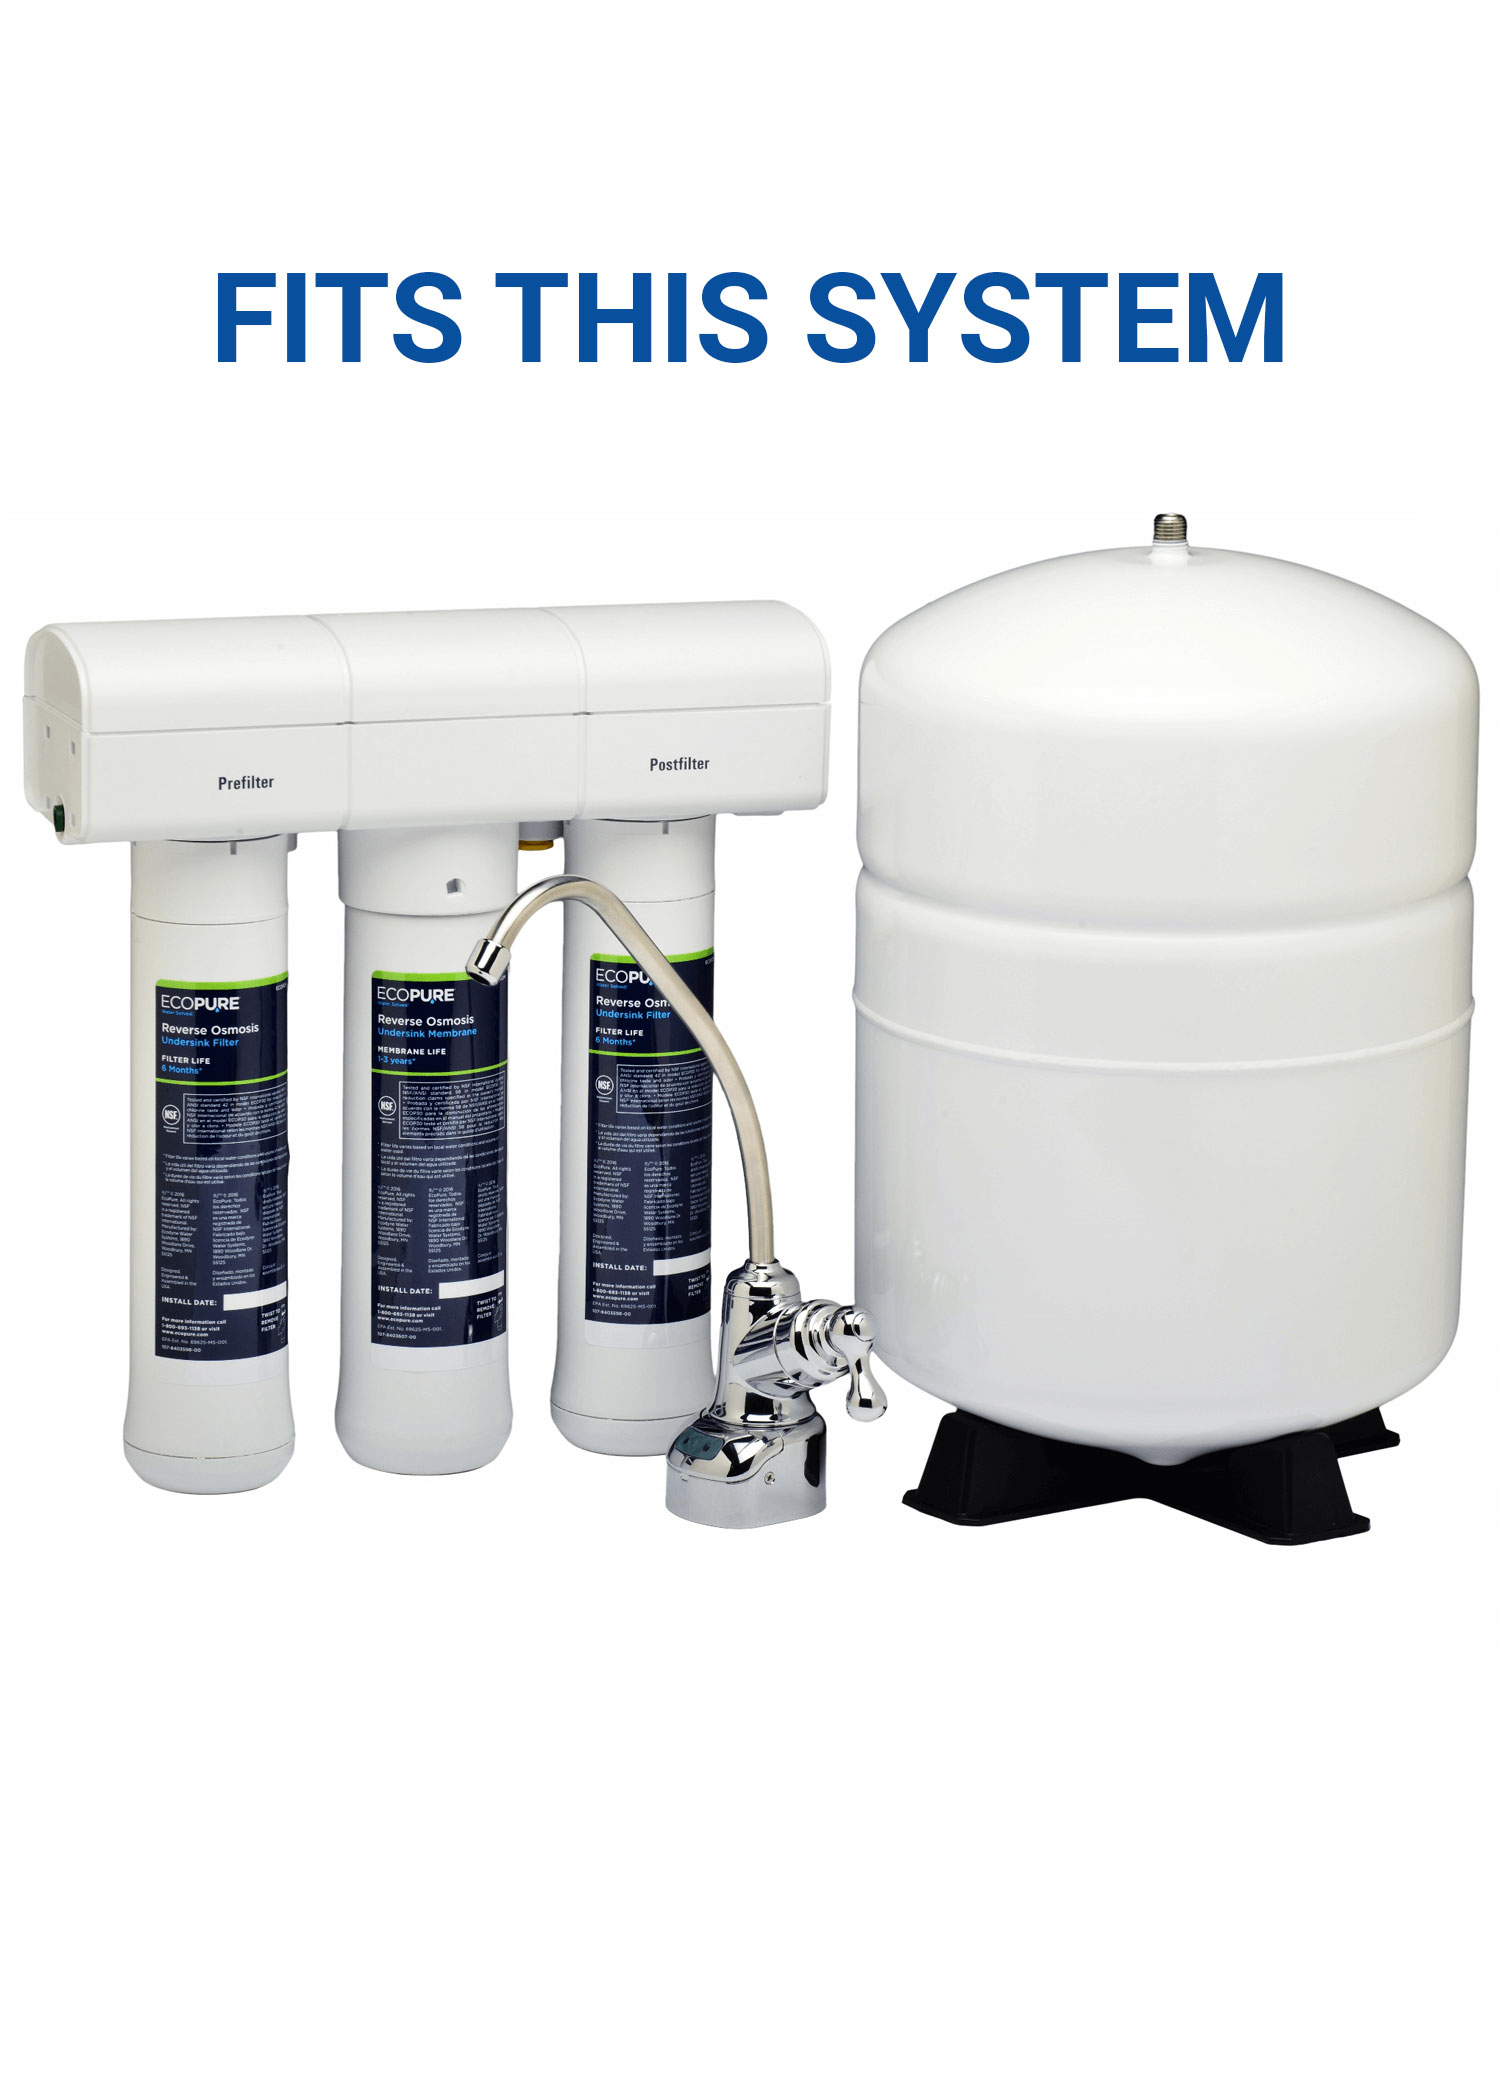 Filter set that fit the ECOPURE Reverse Osmosis system